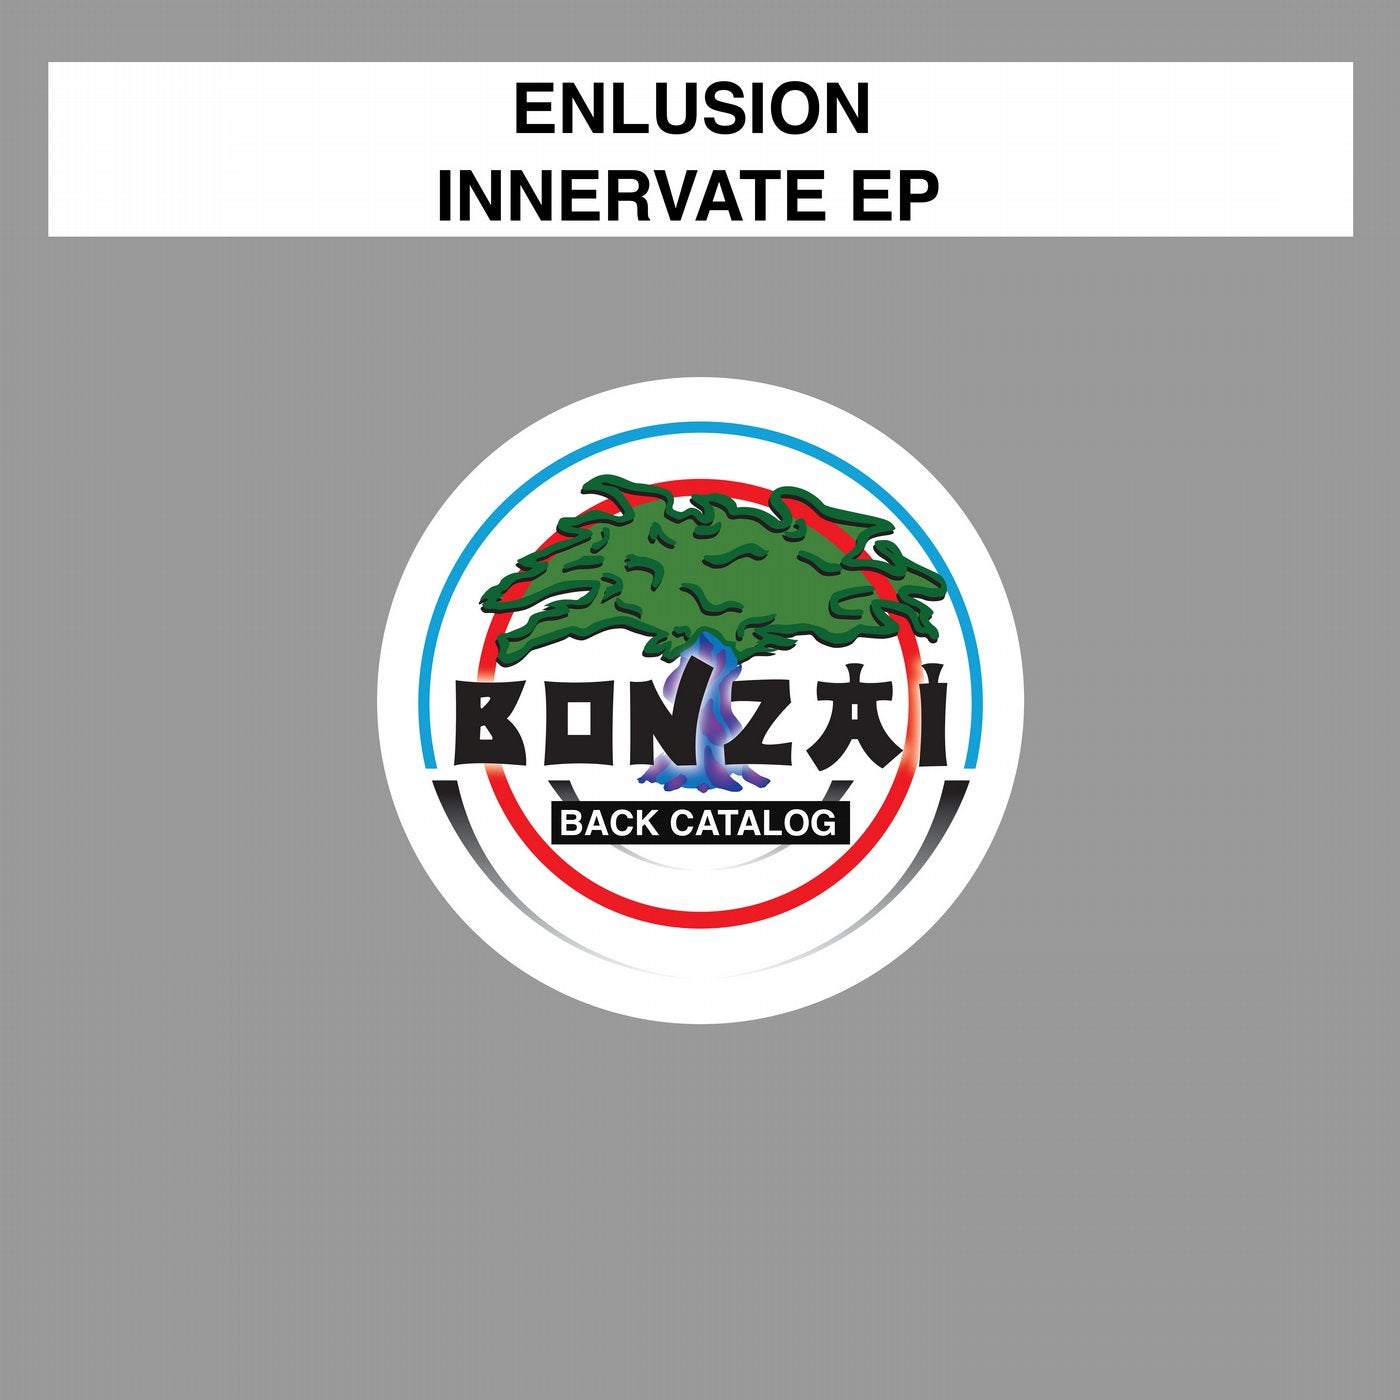 Innervate EP